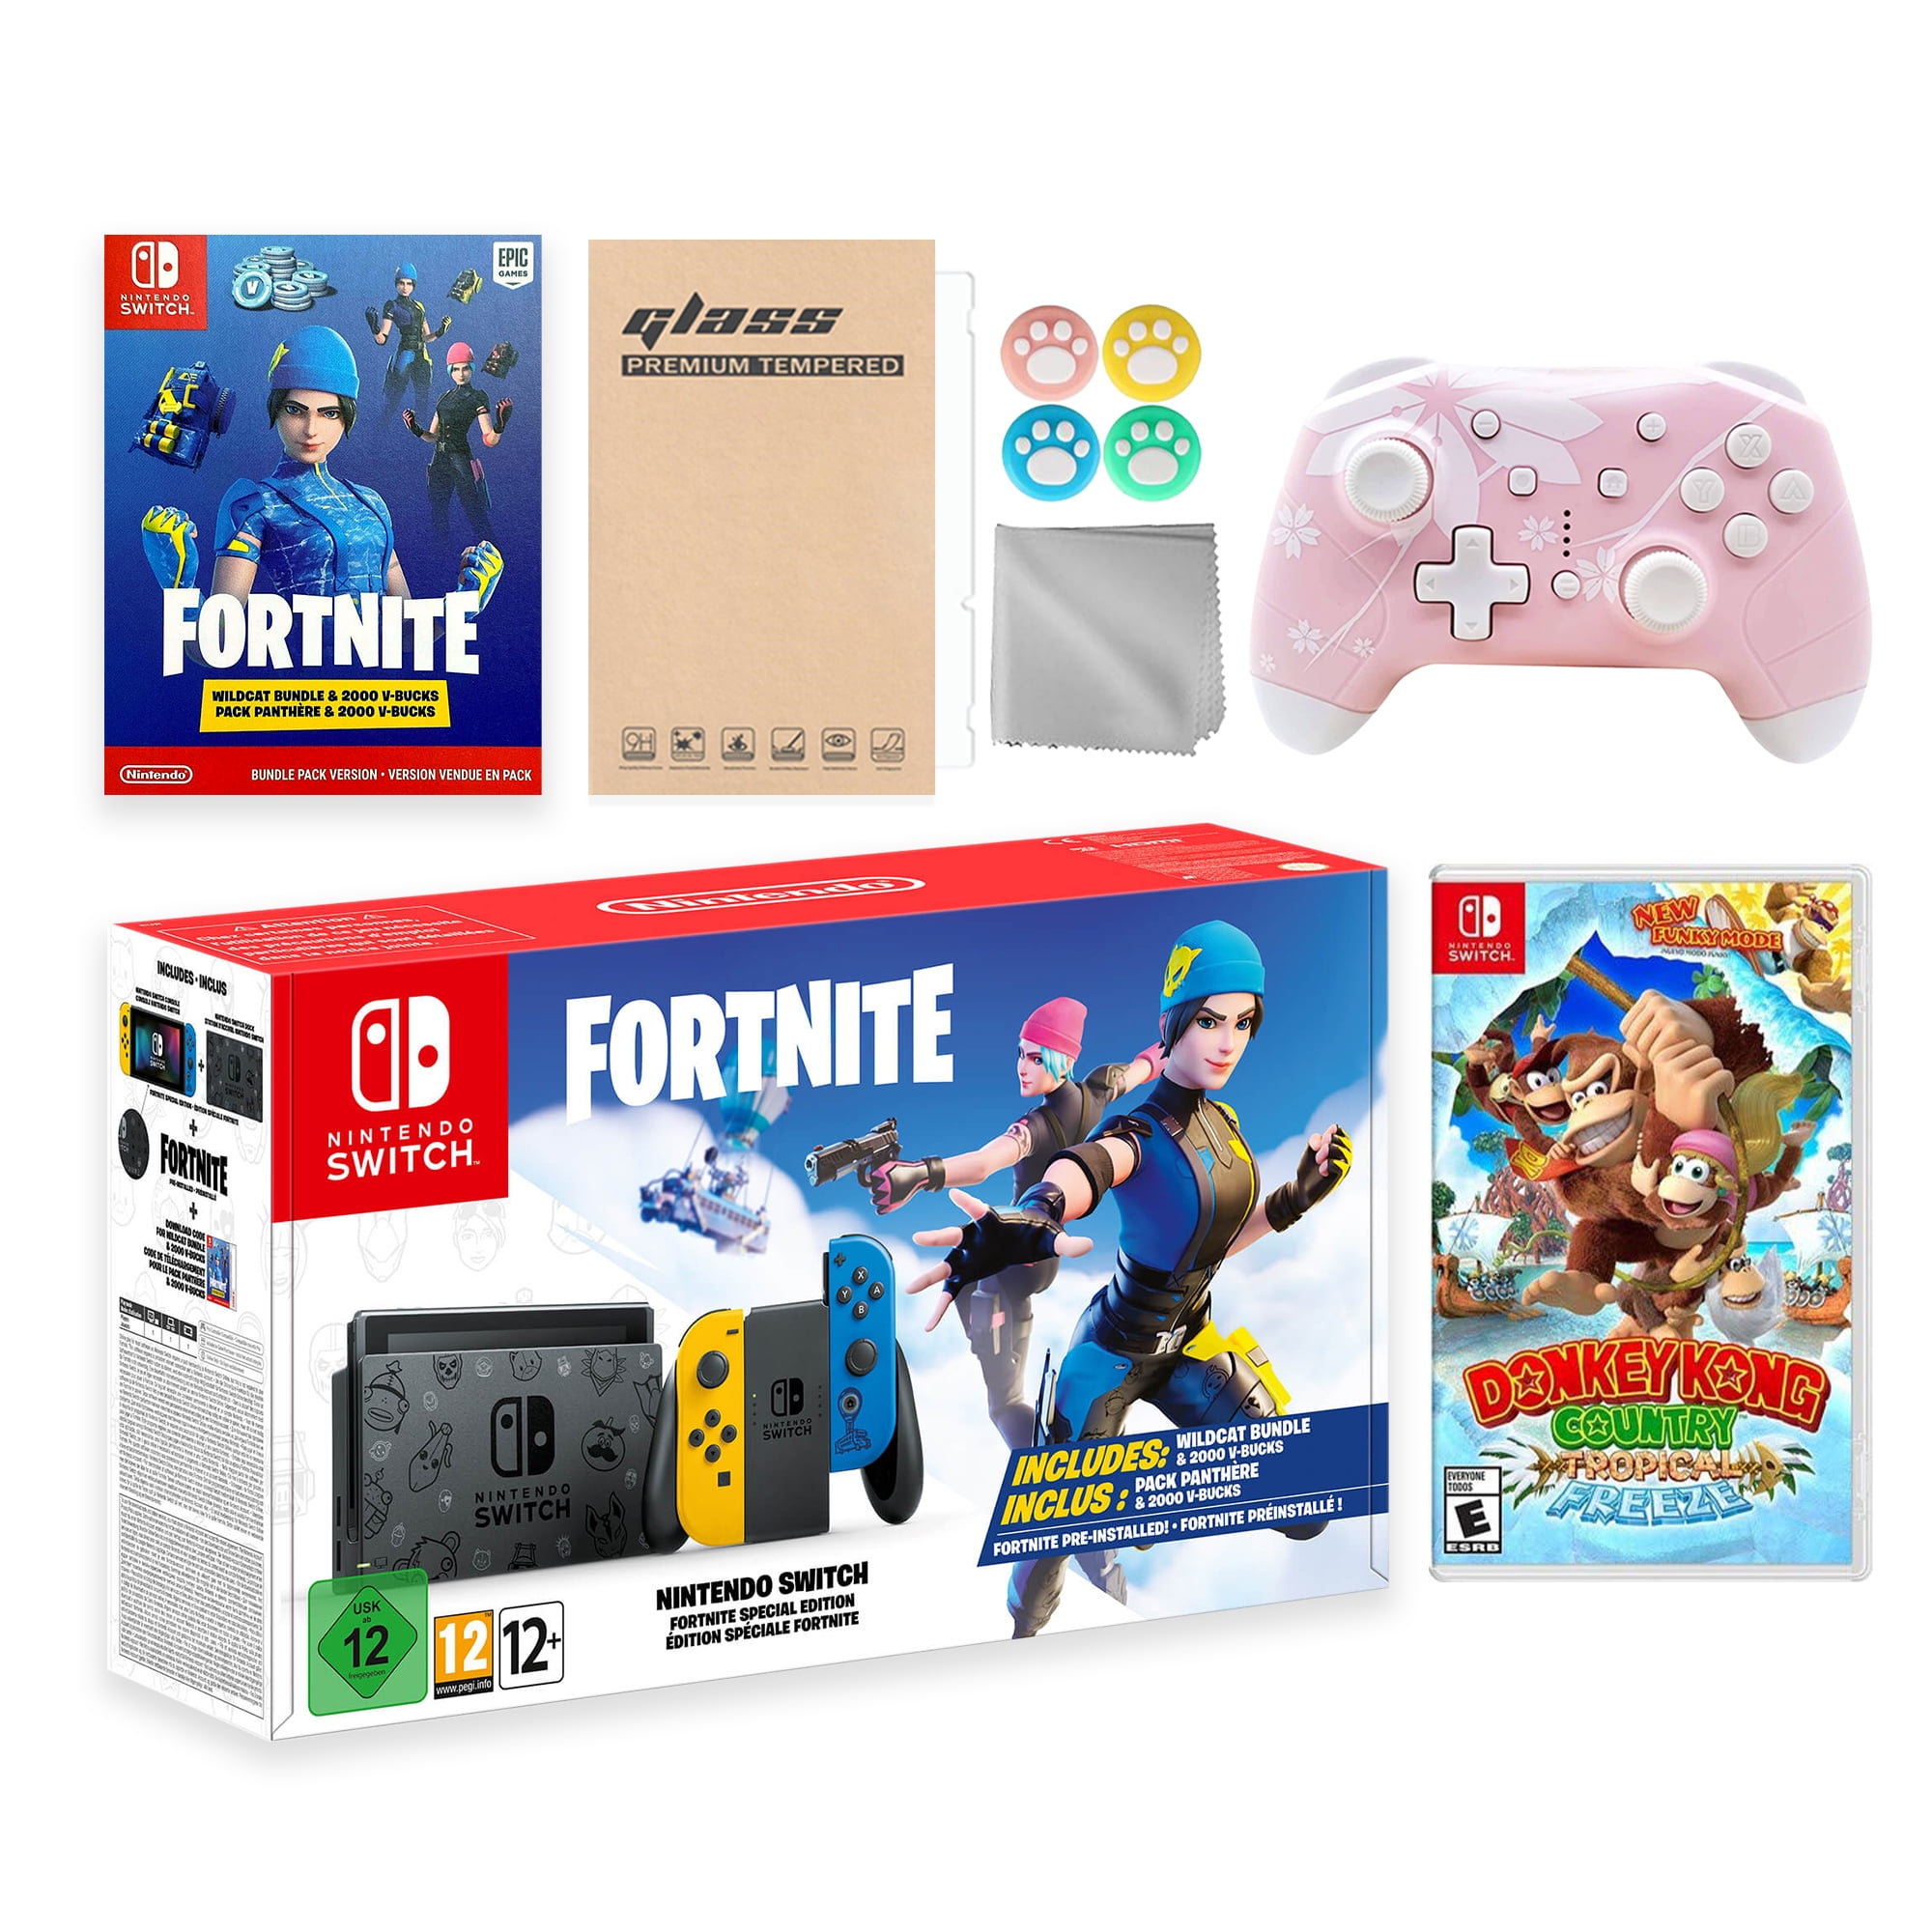 Nintendo Switch Fortnite Wildcat Limited Console Set Epic Wildcat Outfits 00 V Bucks Bundle With Donkey Kong Country And Mytrix Wireless Pro Controller And Accessories Walmart Com Walmart Com